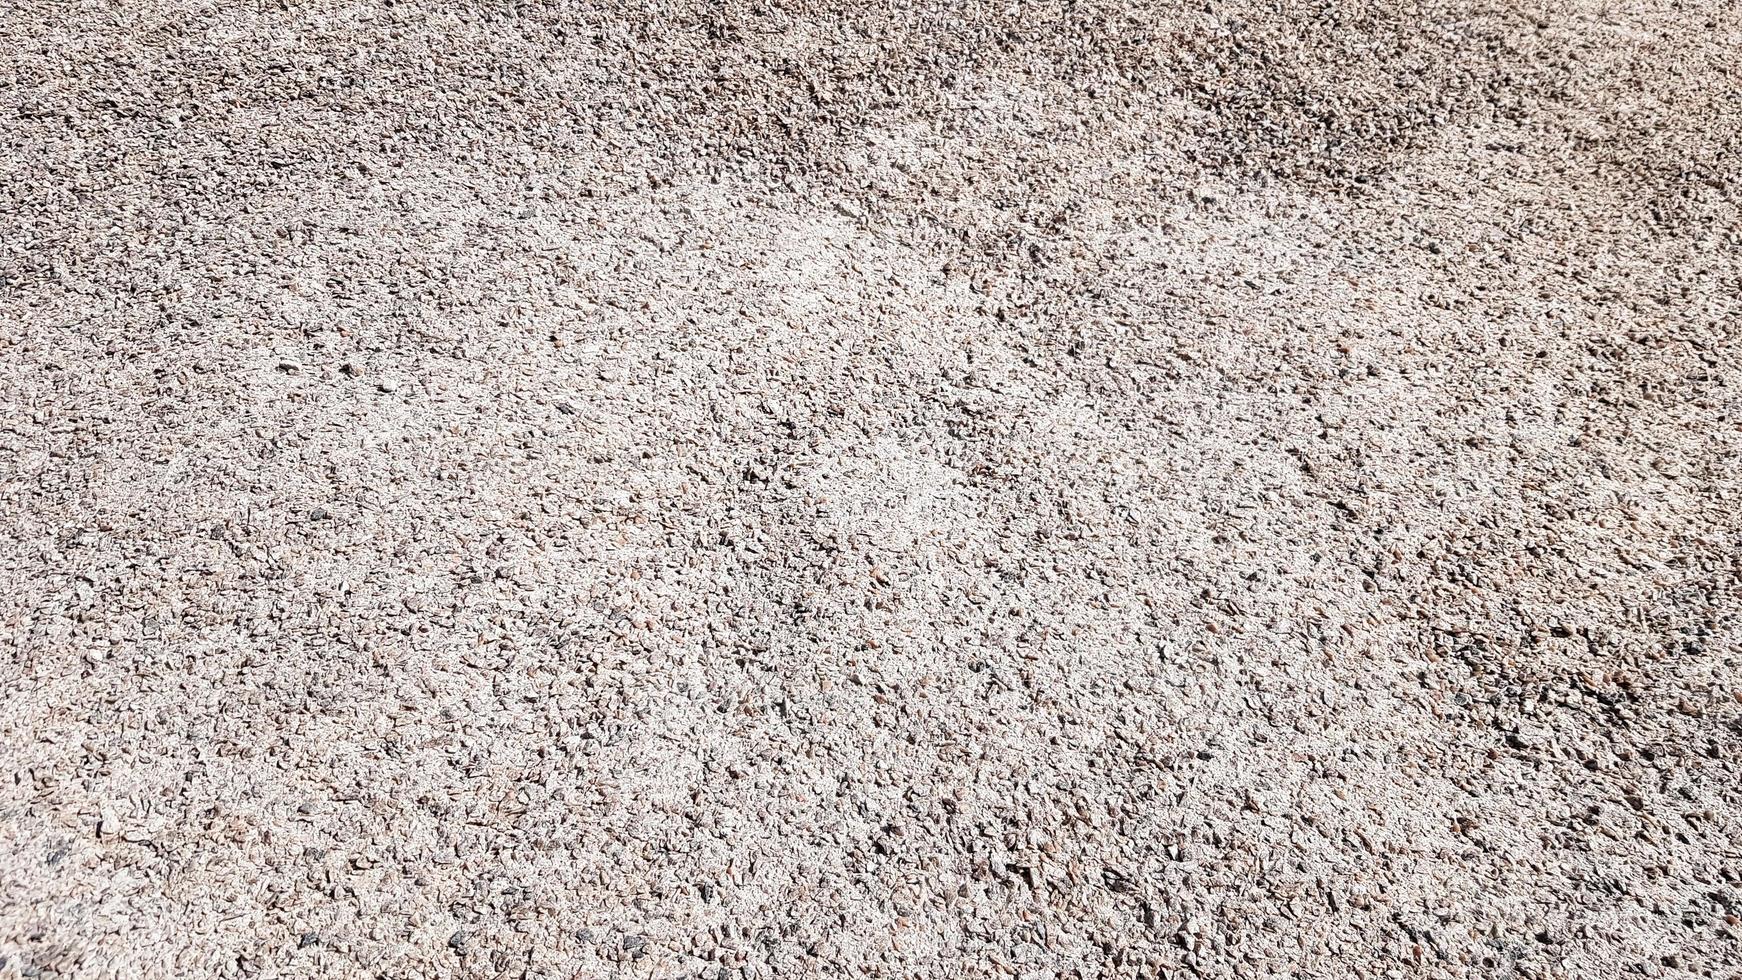 Crushed gravel texture background in natural light. Fine gray gravel for background or texture. Natural building material for road construction or landscape architecture. Construction industry photo